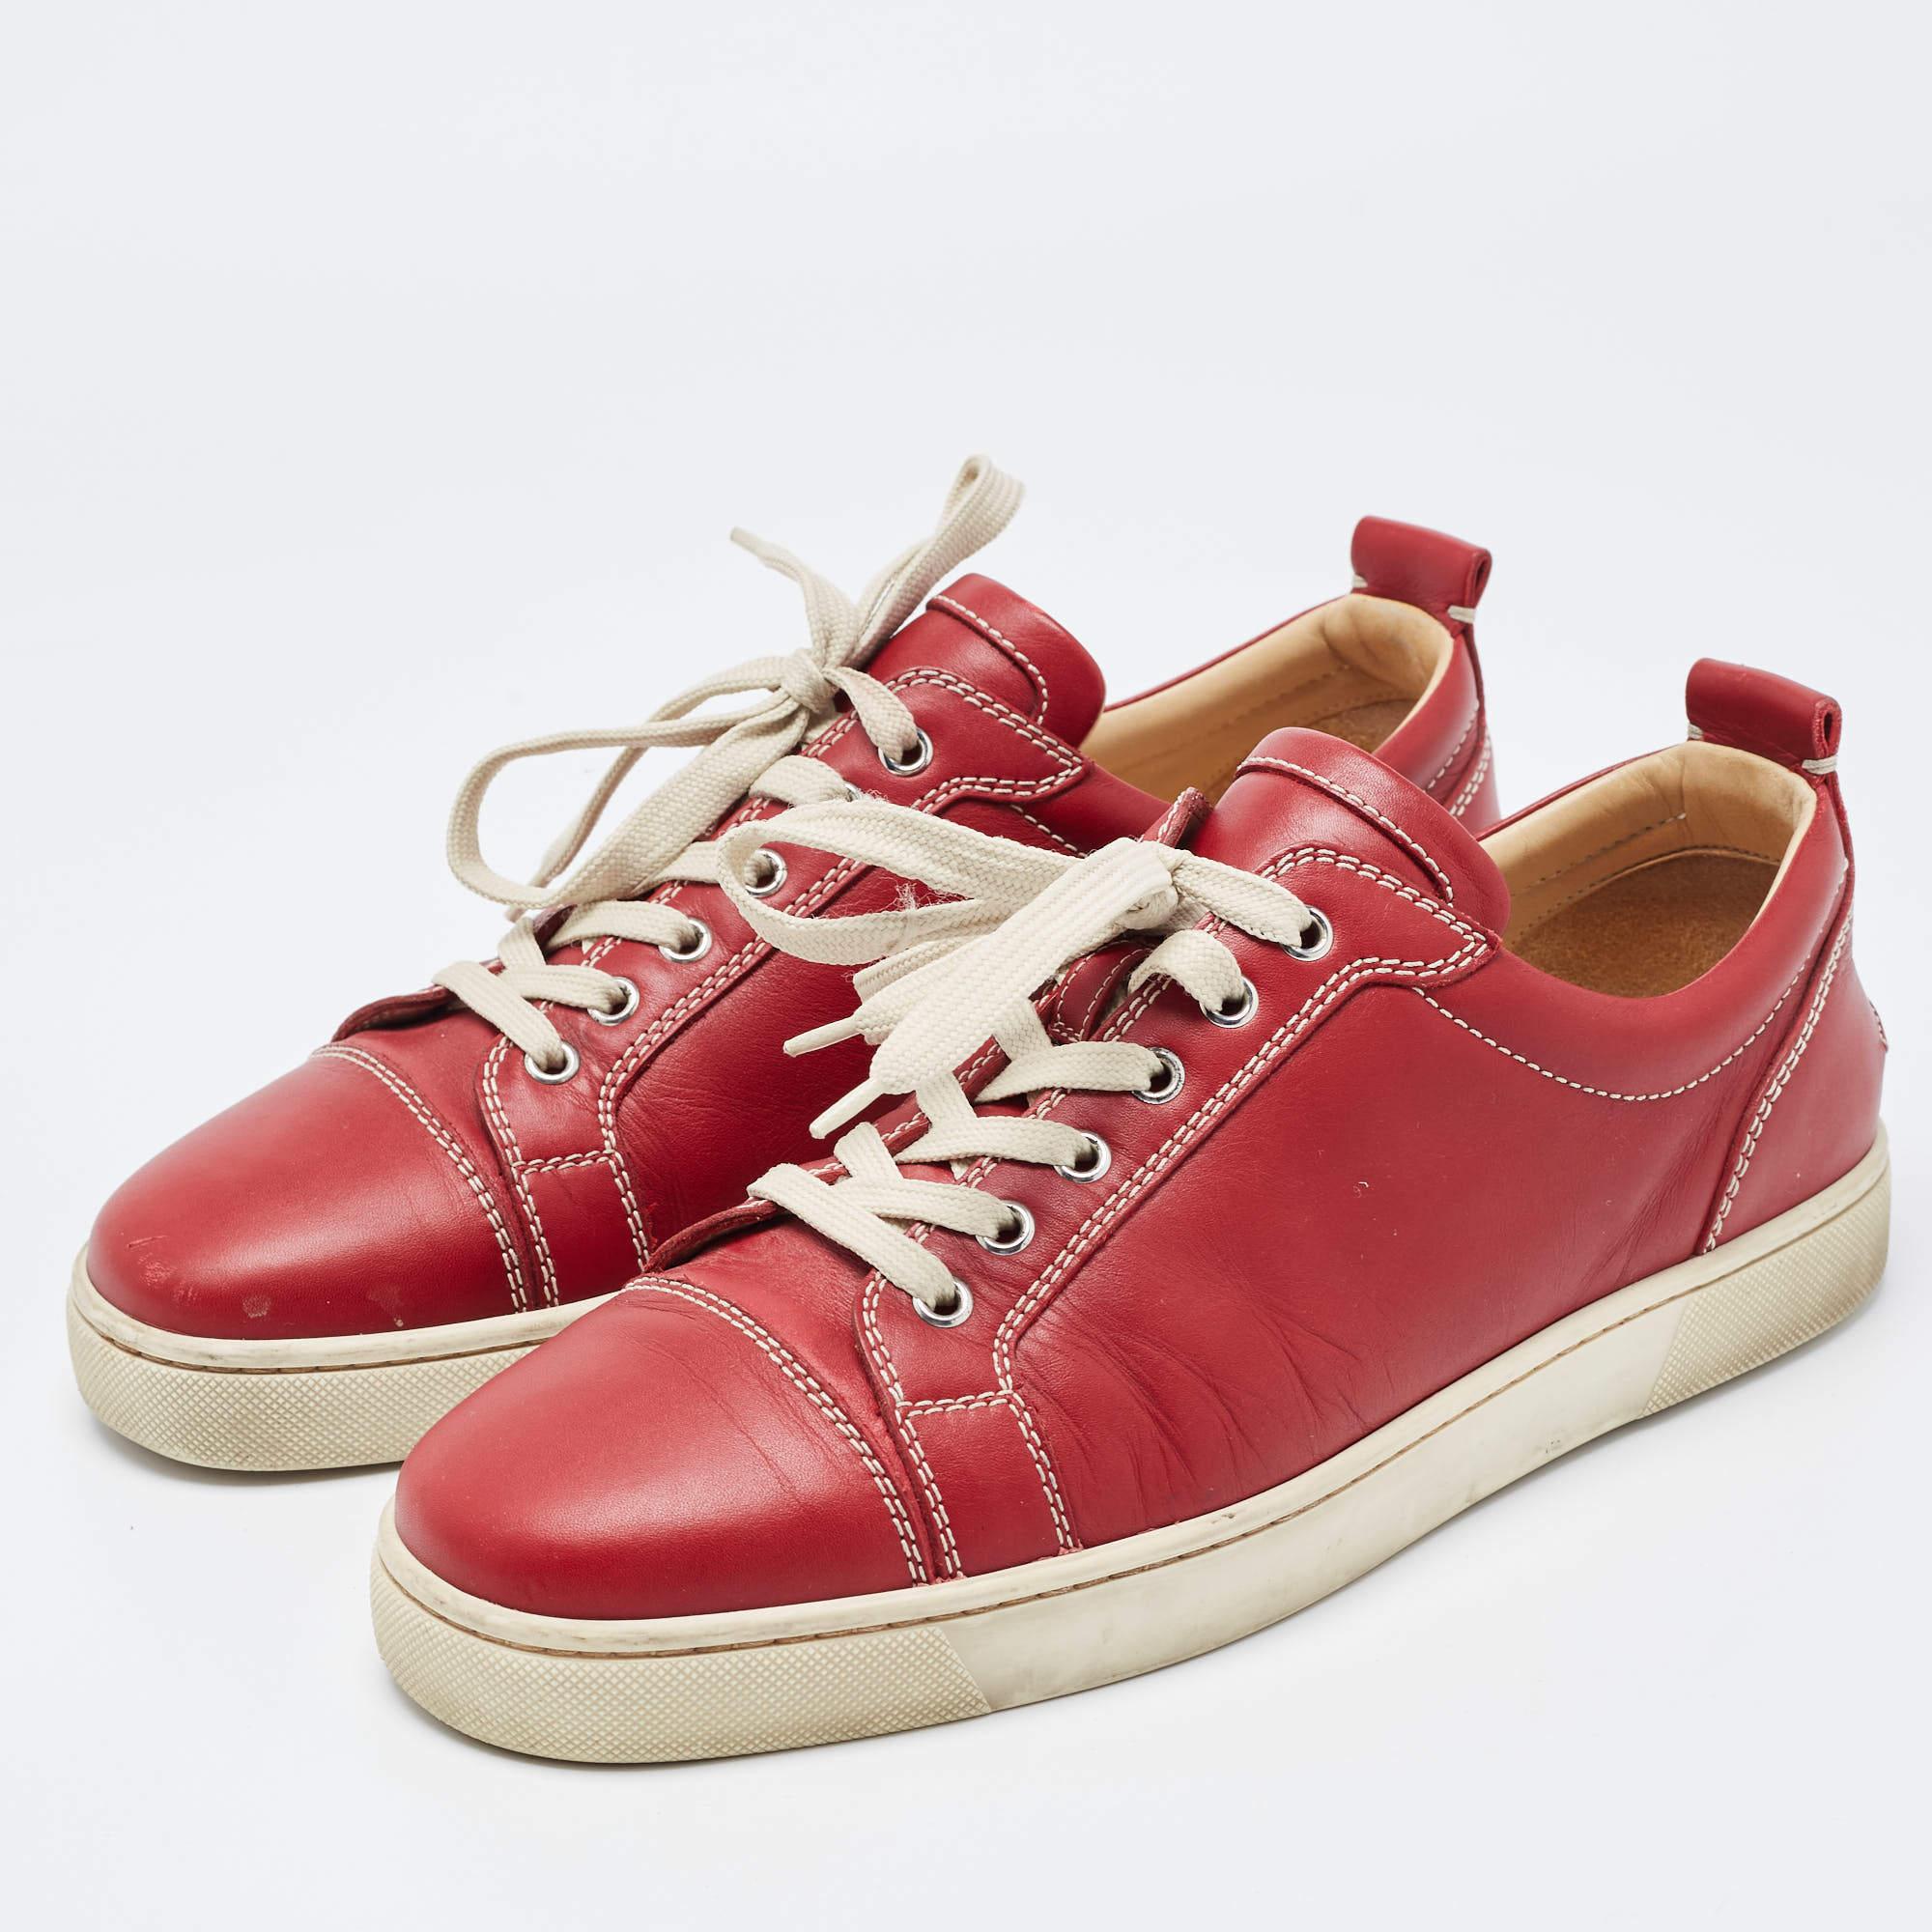 Men's Christian Louboutin Red Leather Sneakers Size 42.5